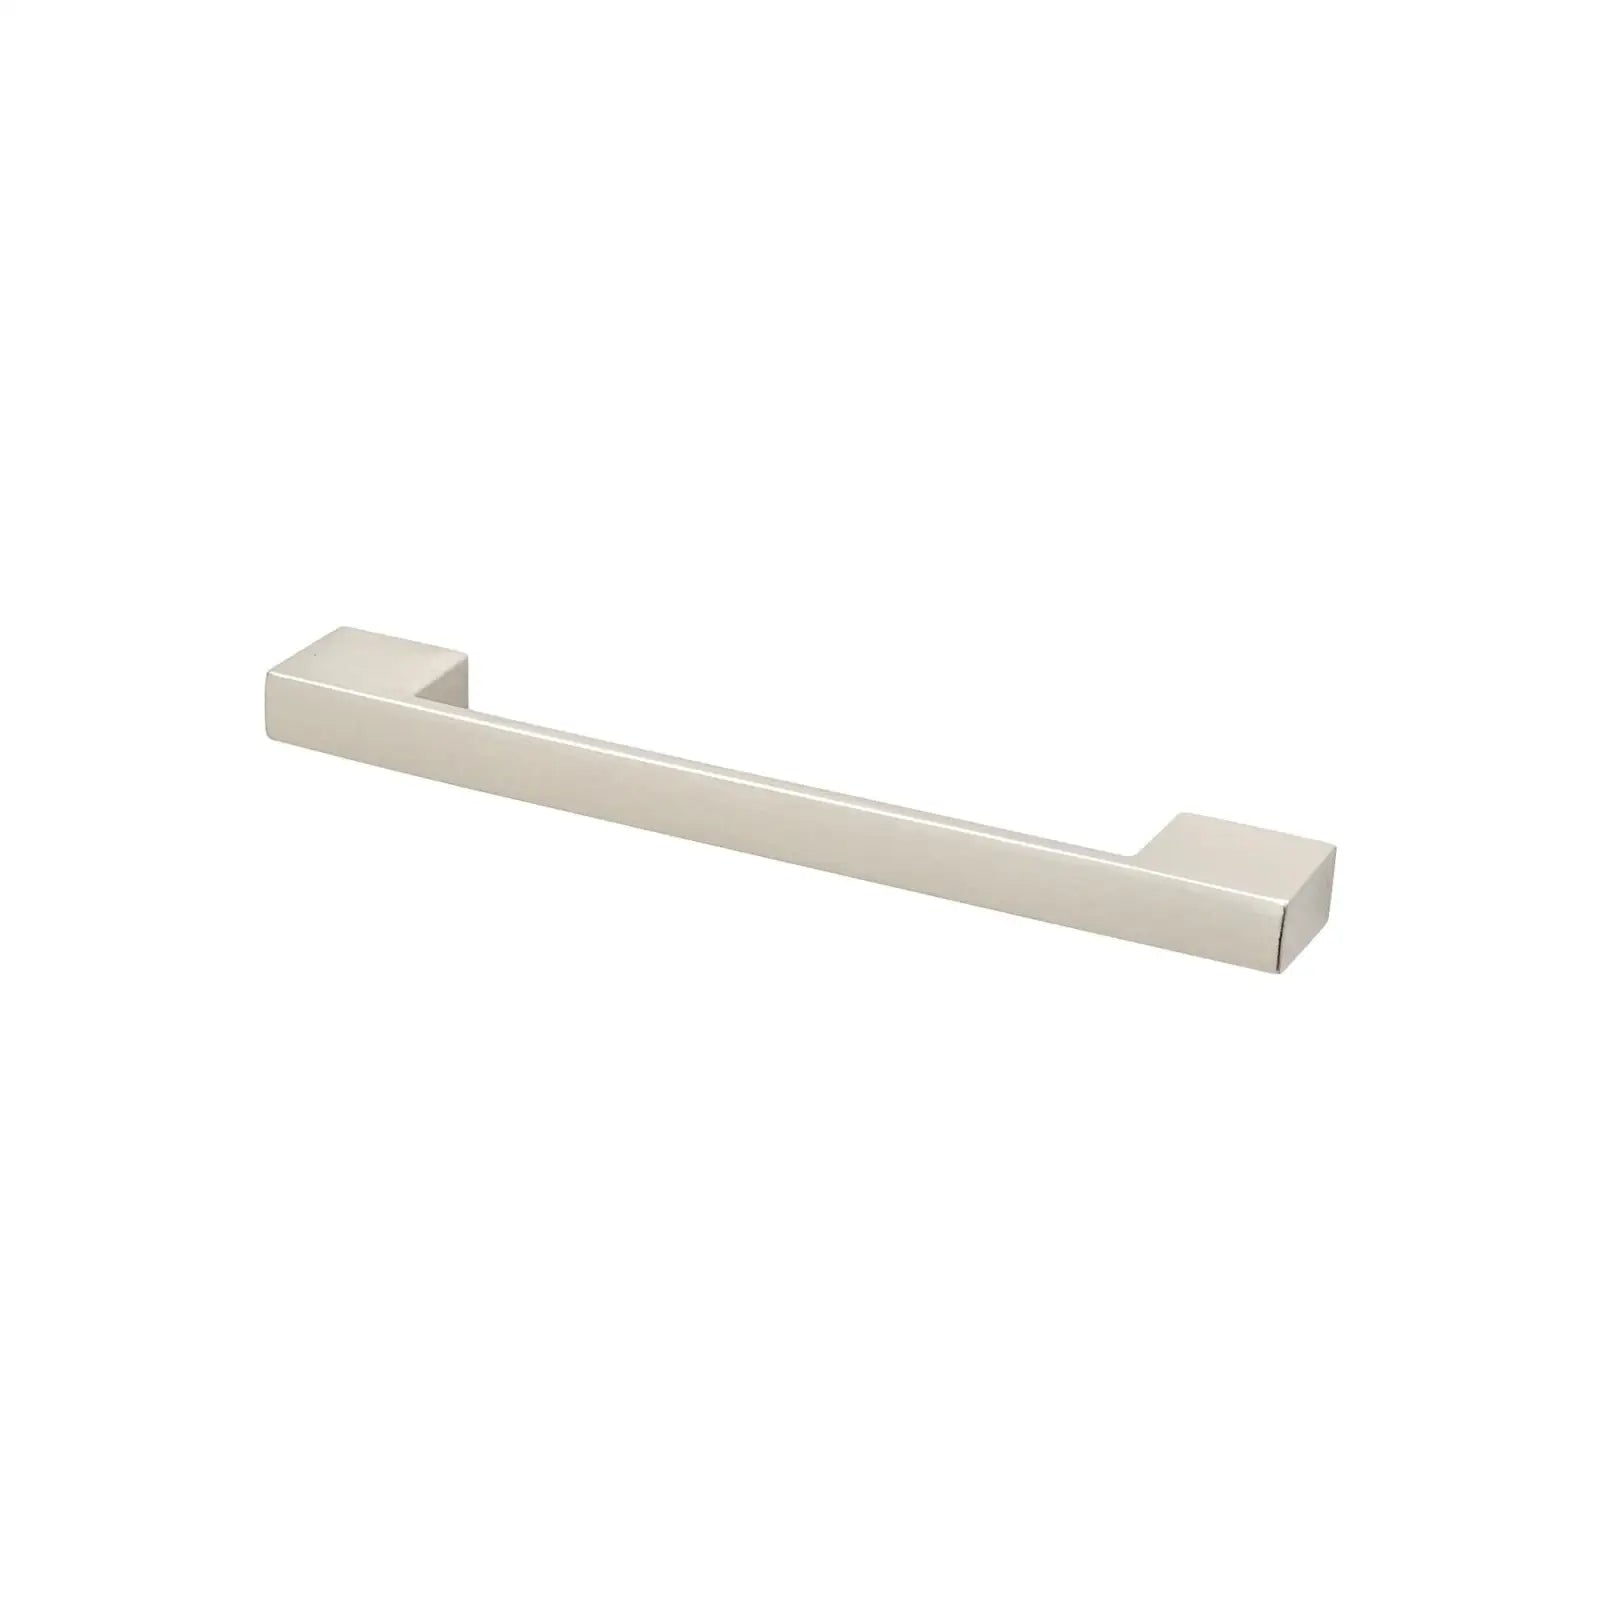 Dimora - D Shaped Kitchen Cabinet Pull Handle - Satin Nickel - Decor And Decor